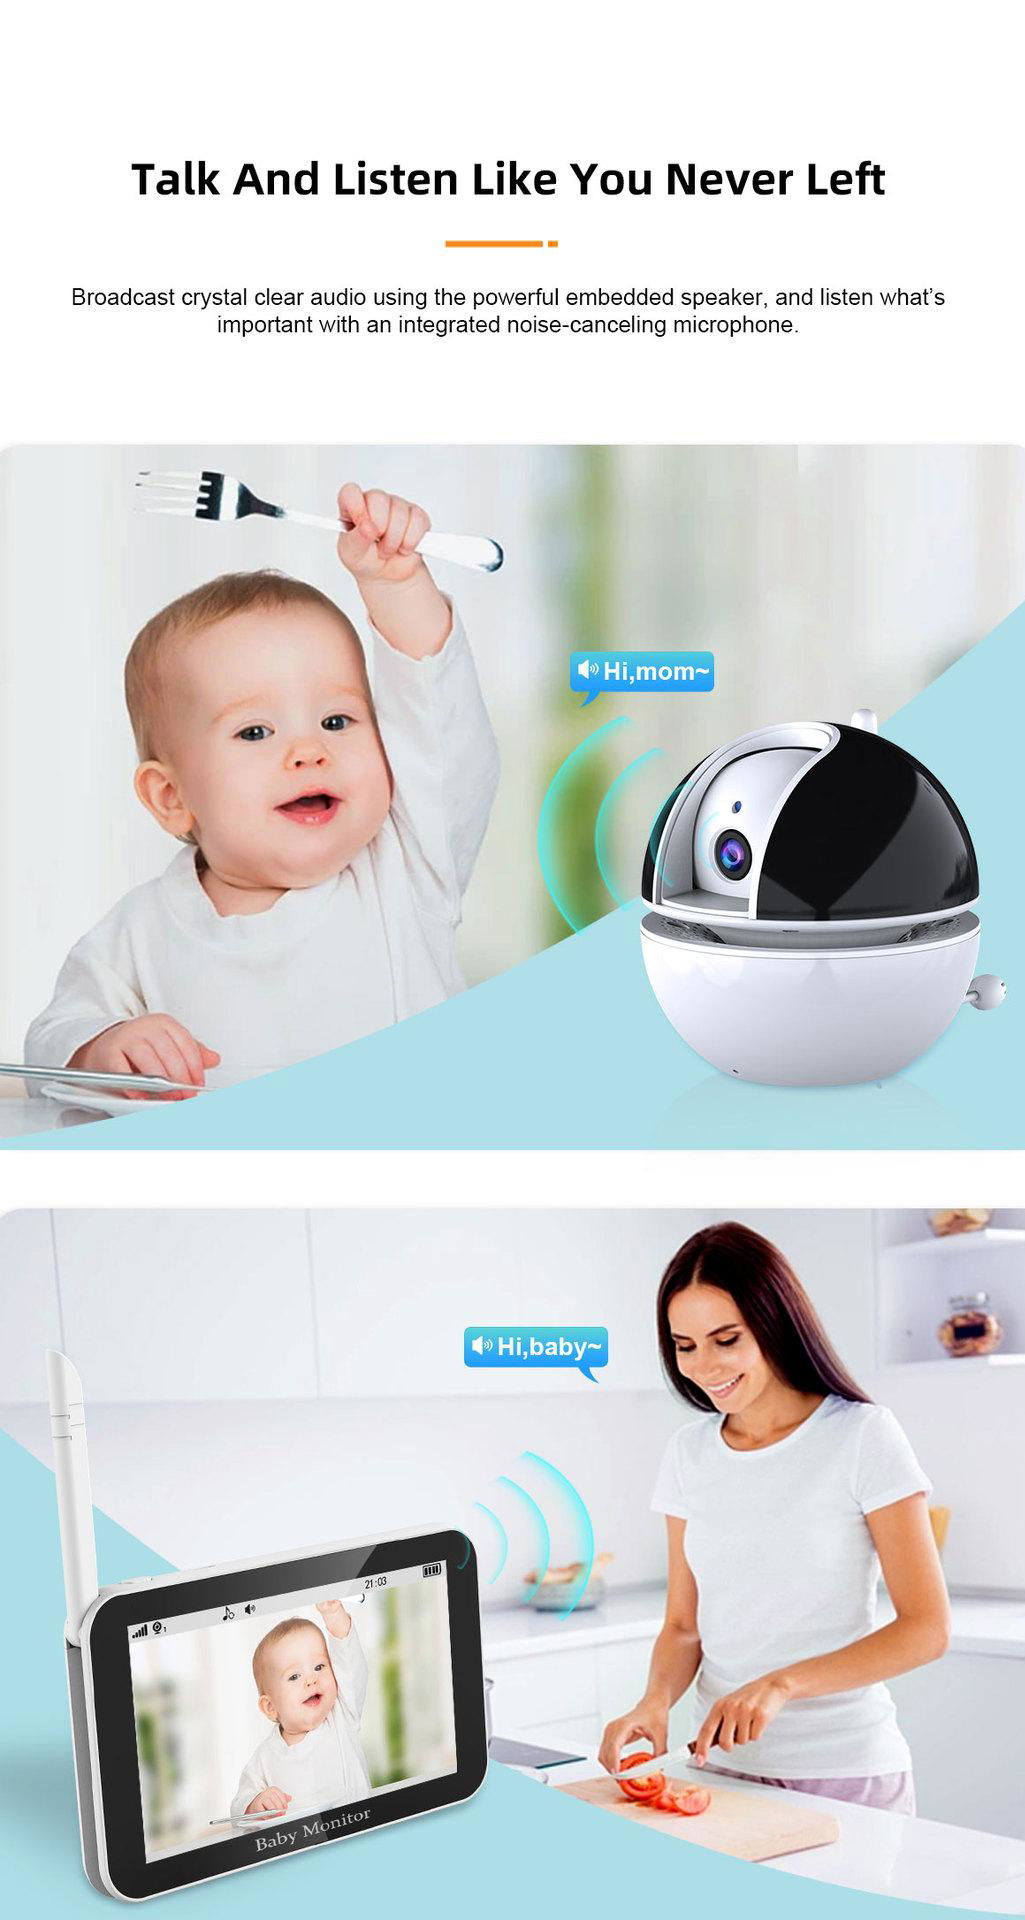 NEW 5inch LCD Screen and Touch Panel Baby Monitor with Smart WiFi Camera 3